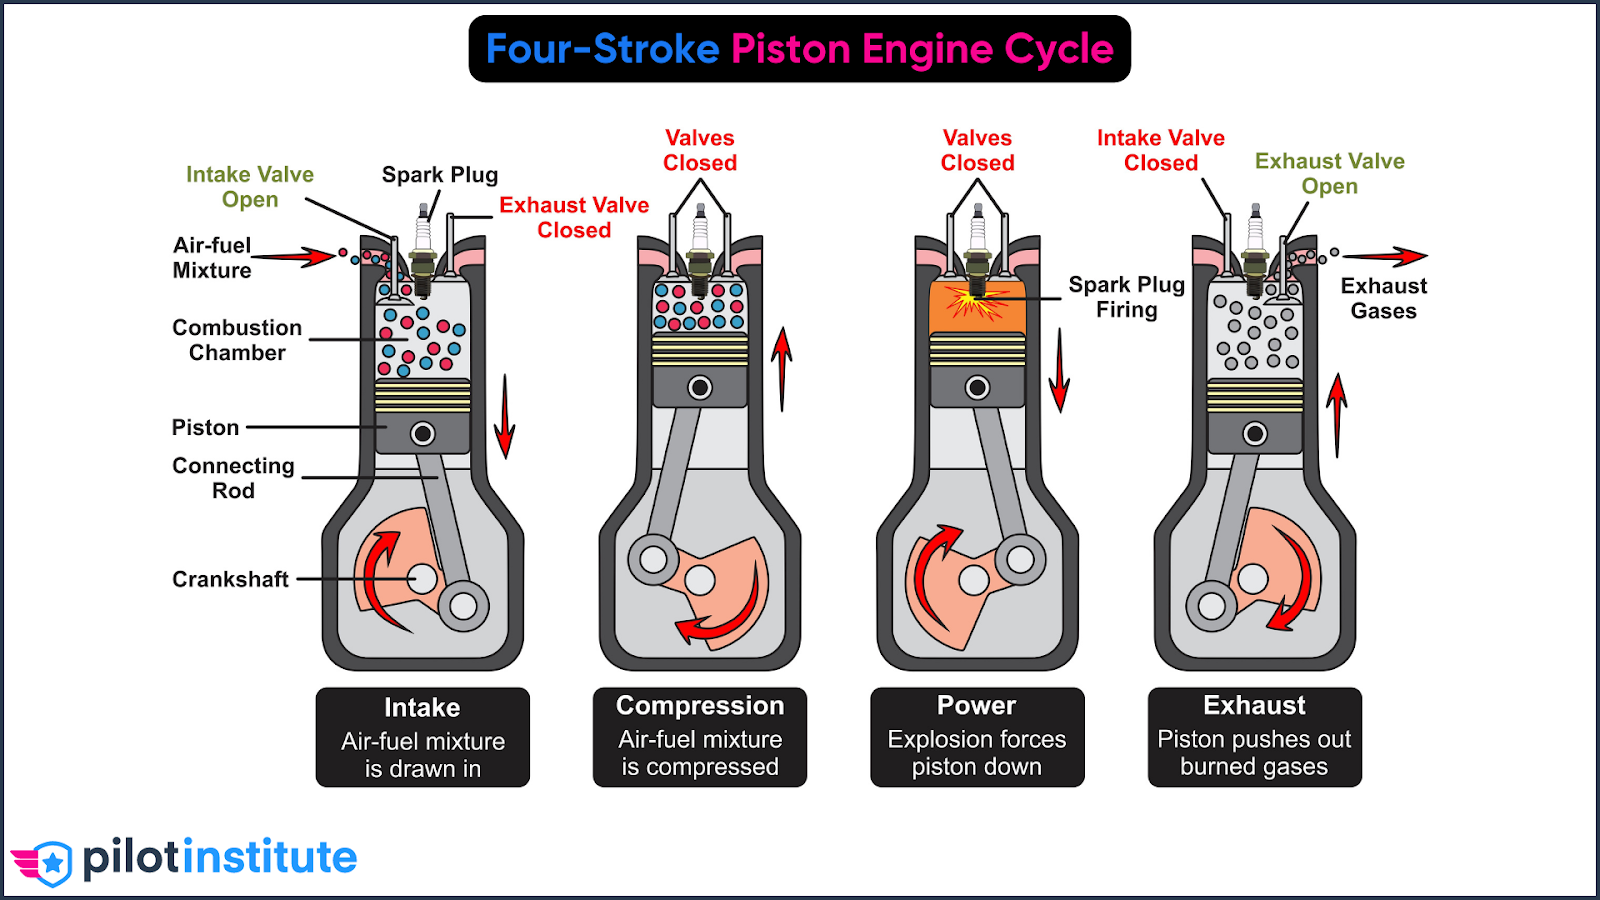 A diagram of the four-stroke piston engine cycle.